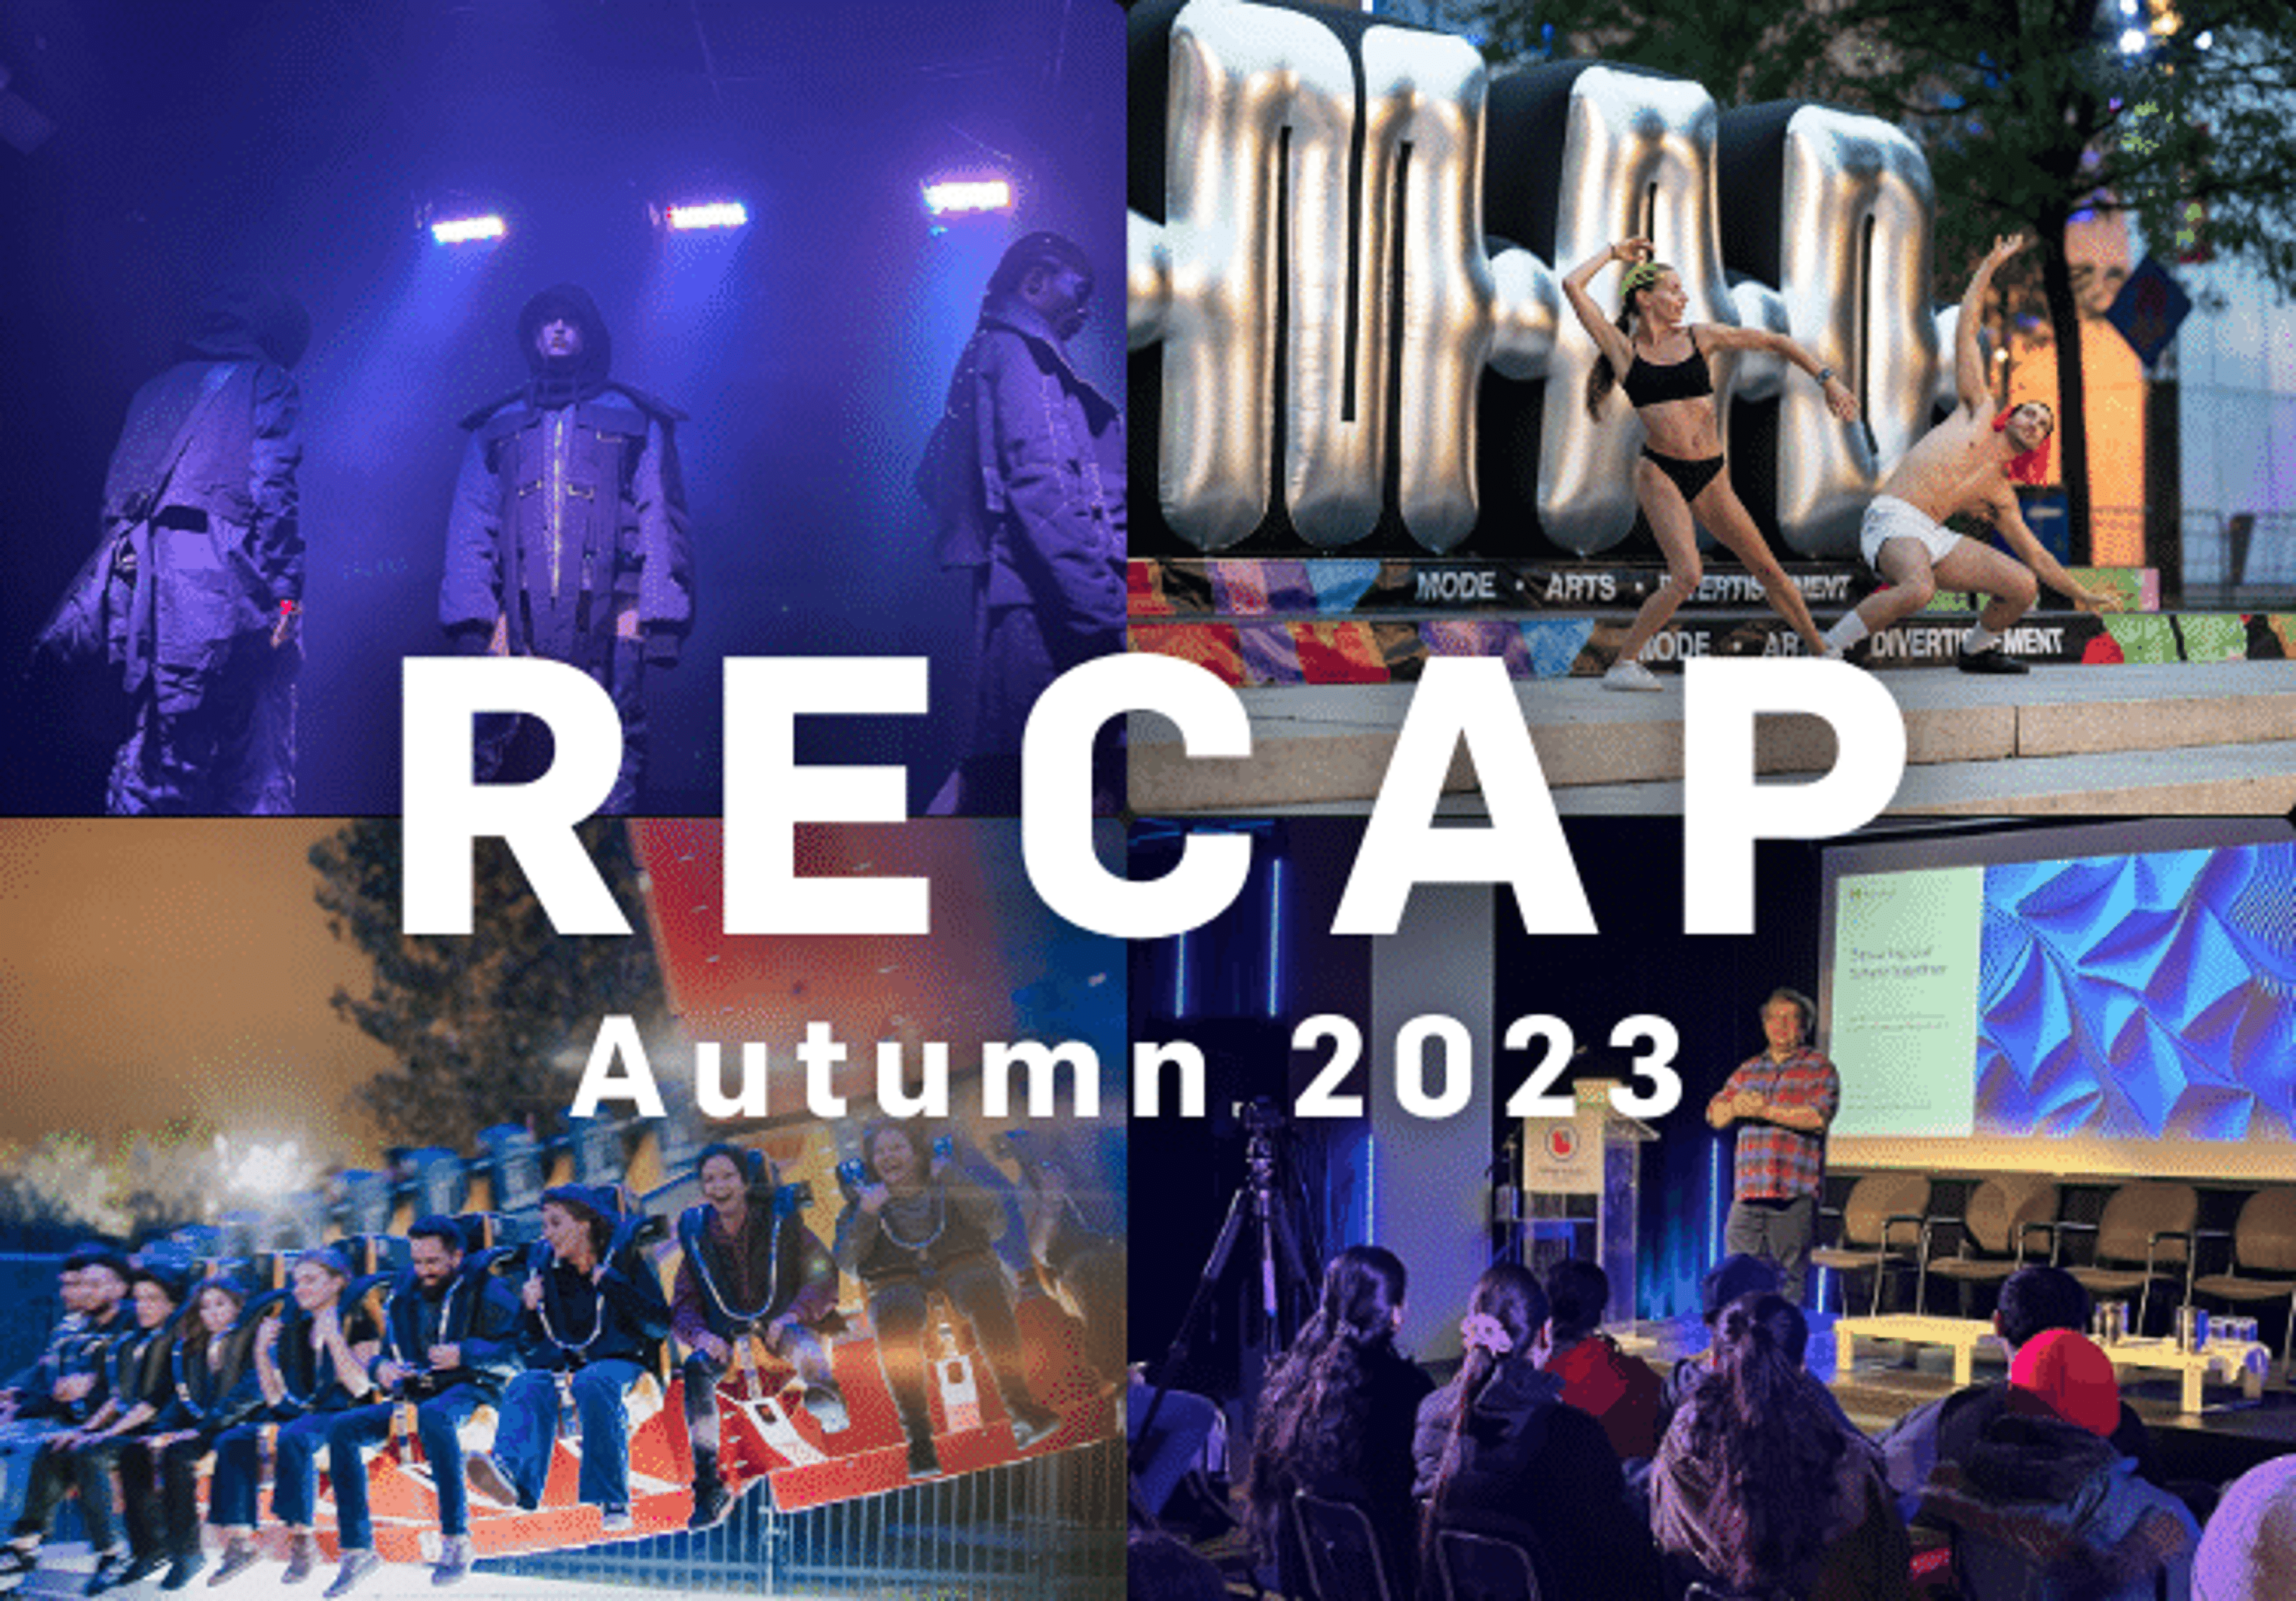 A vibrant collage showcasing a series of events from Autumn 2023, including fashion shows, outdoor concerts, and educational seminars, highlighting the season's diverse cultural activities.